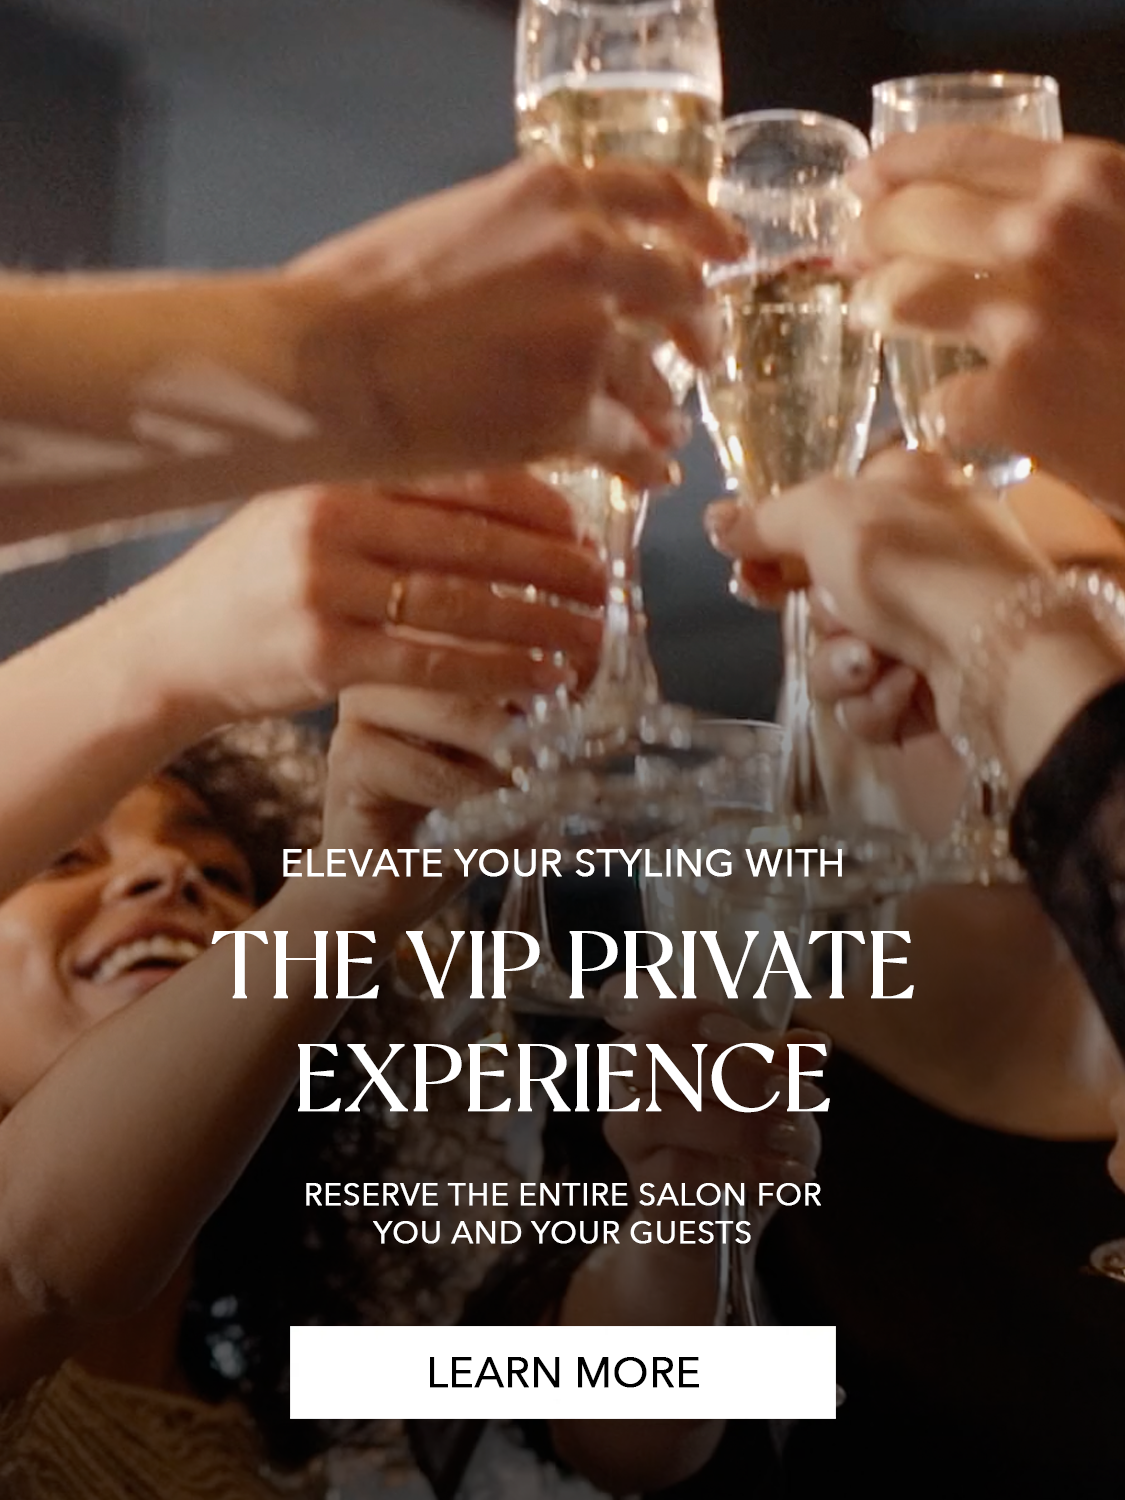 The VIP Private Experience